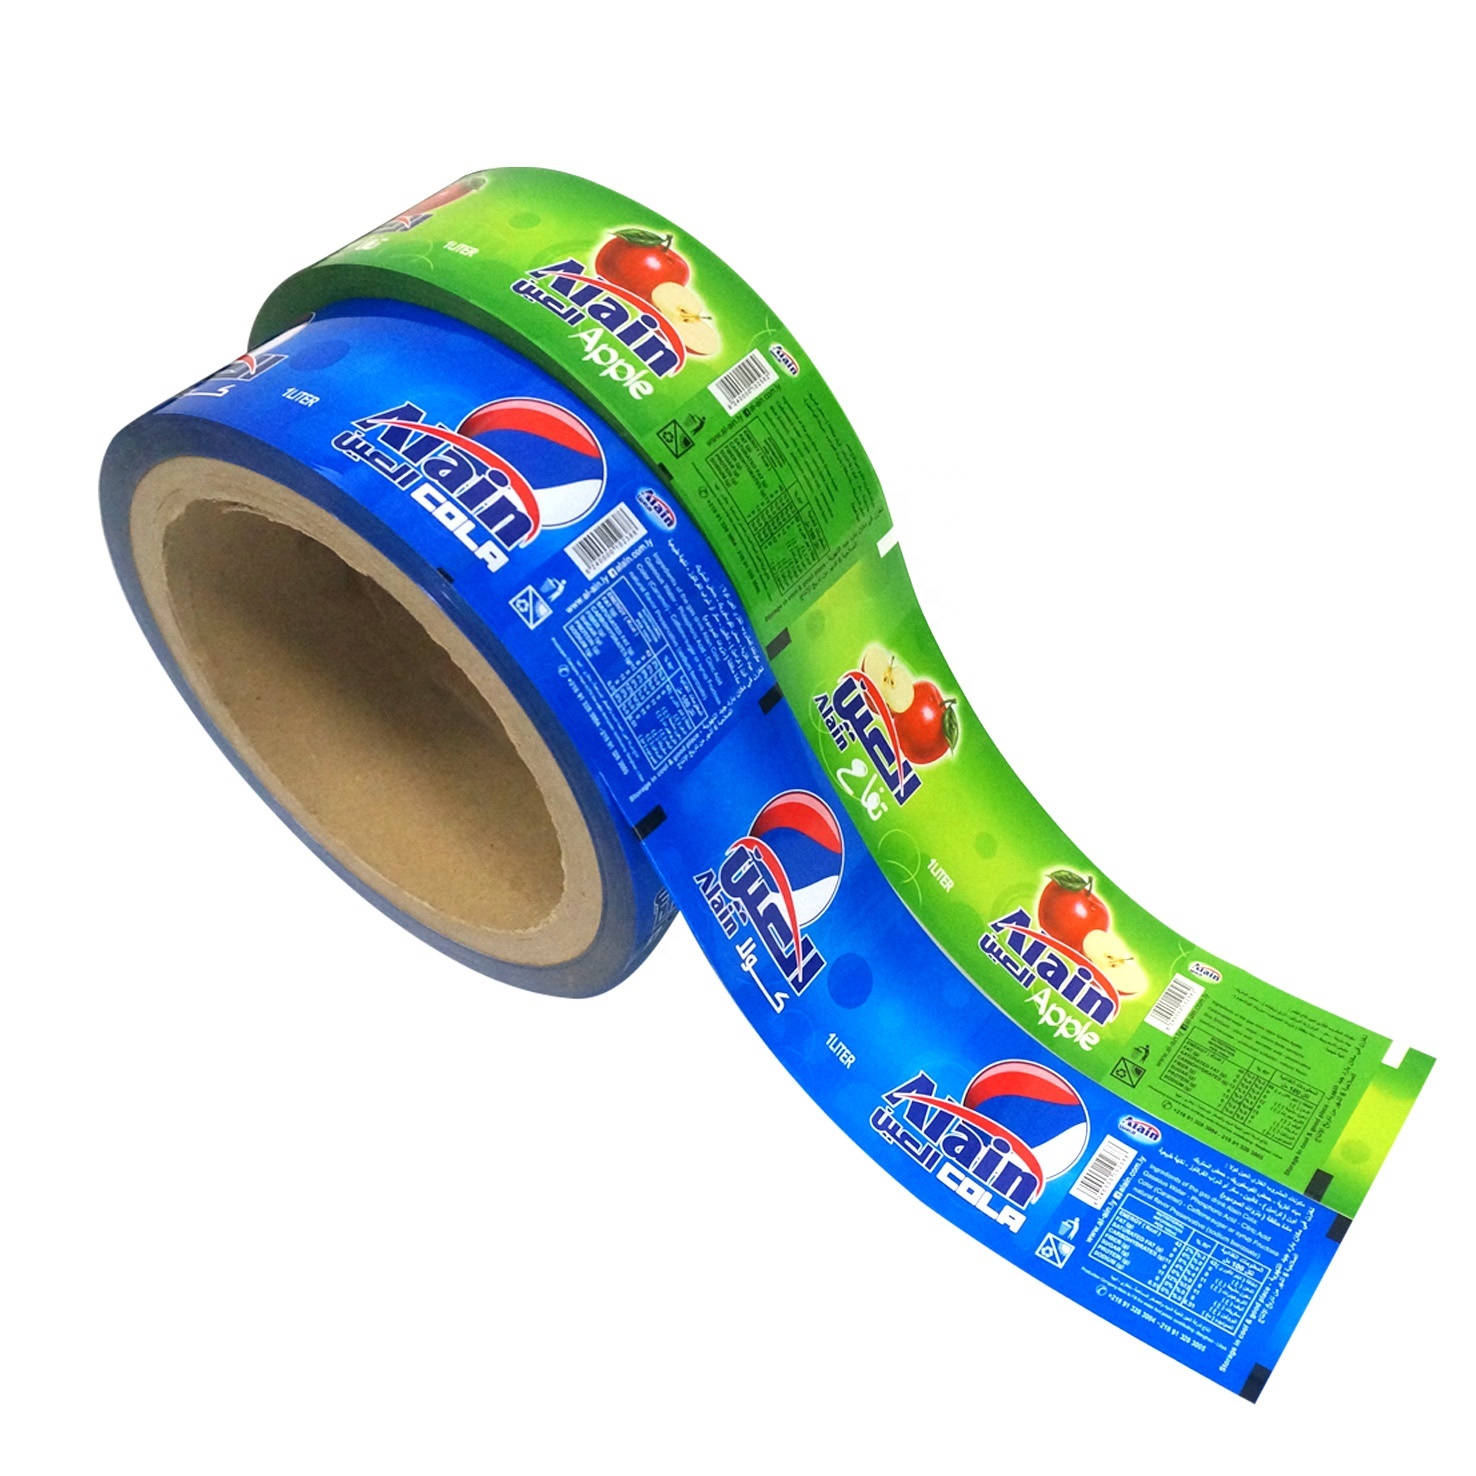 DQ PACK High Quality Customized Film Candy Roll Packaging Stock Film Superior Twist Wrap Film